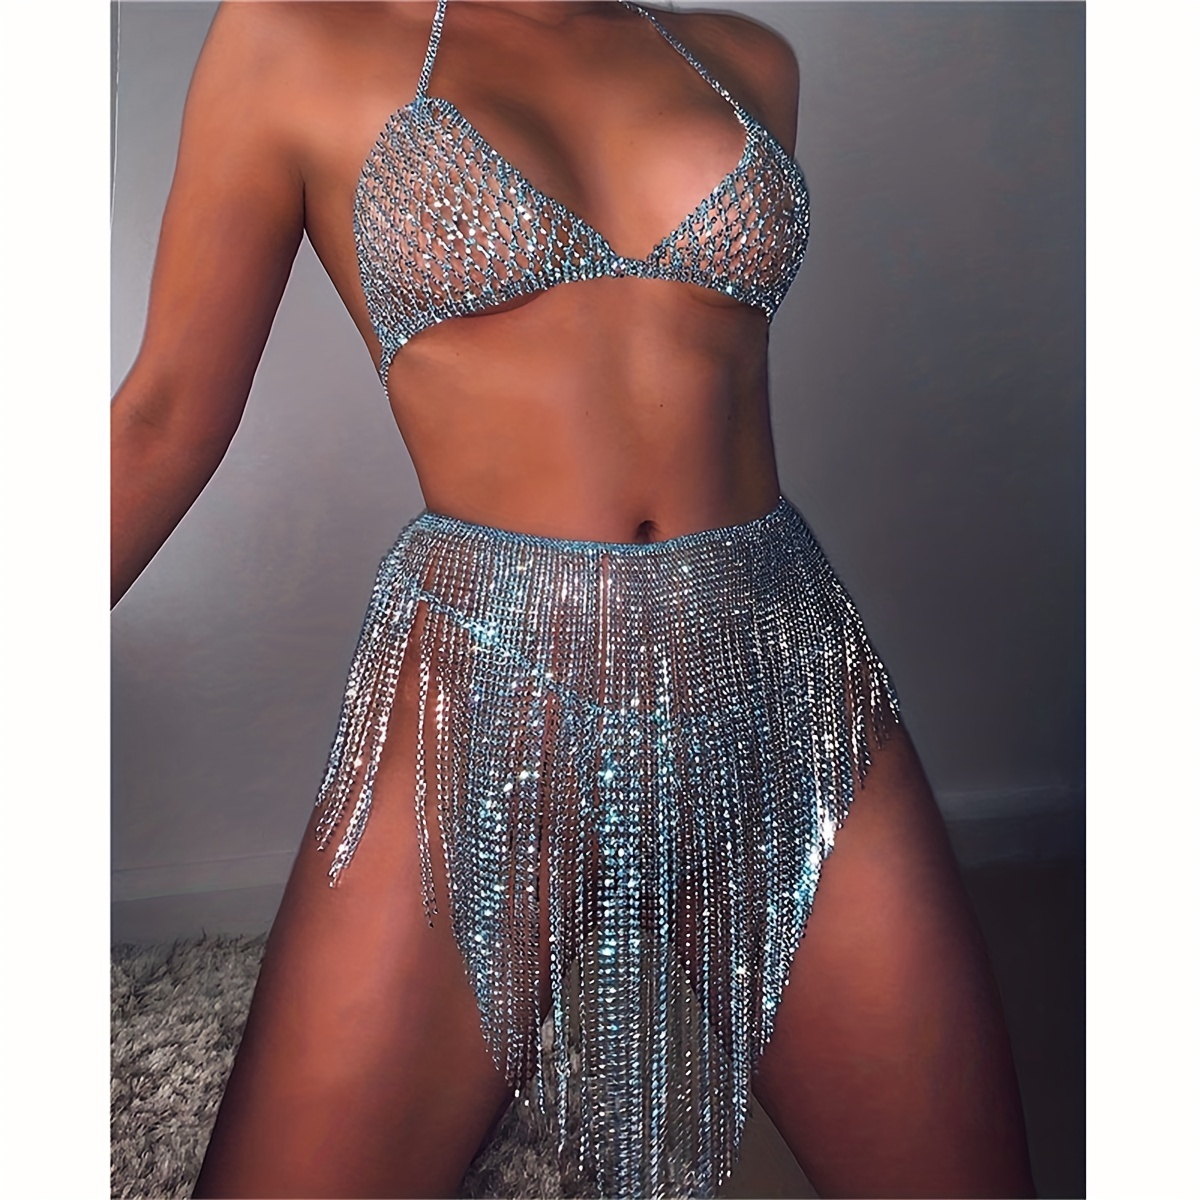 Body Chain Jewelry, Chainmail Bralette, Skinny Necklace, Festive Bra, Crop  Top, Sexy Skirt Lingerie Set, Holiday Jewellery -  Canada